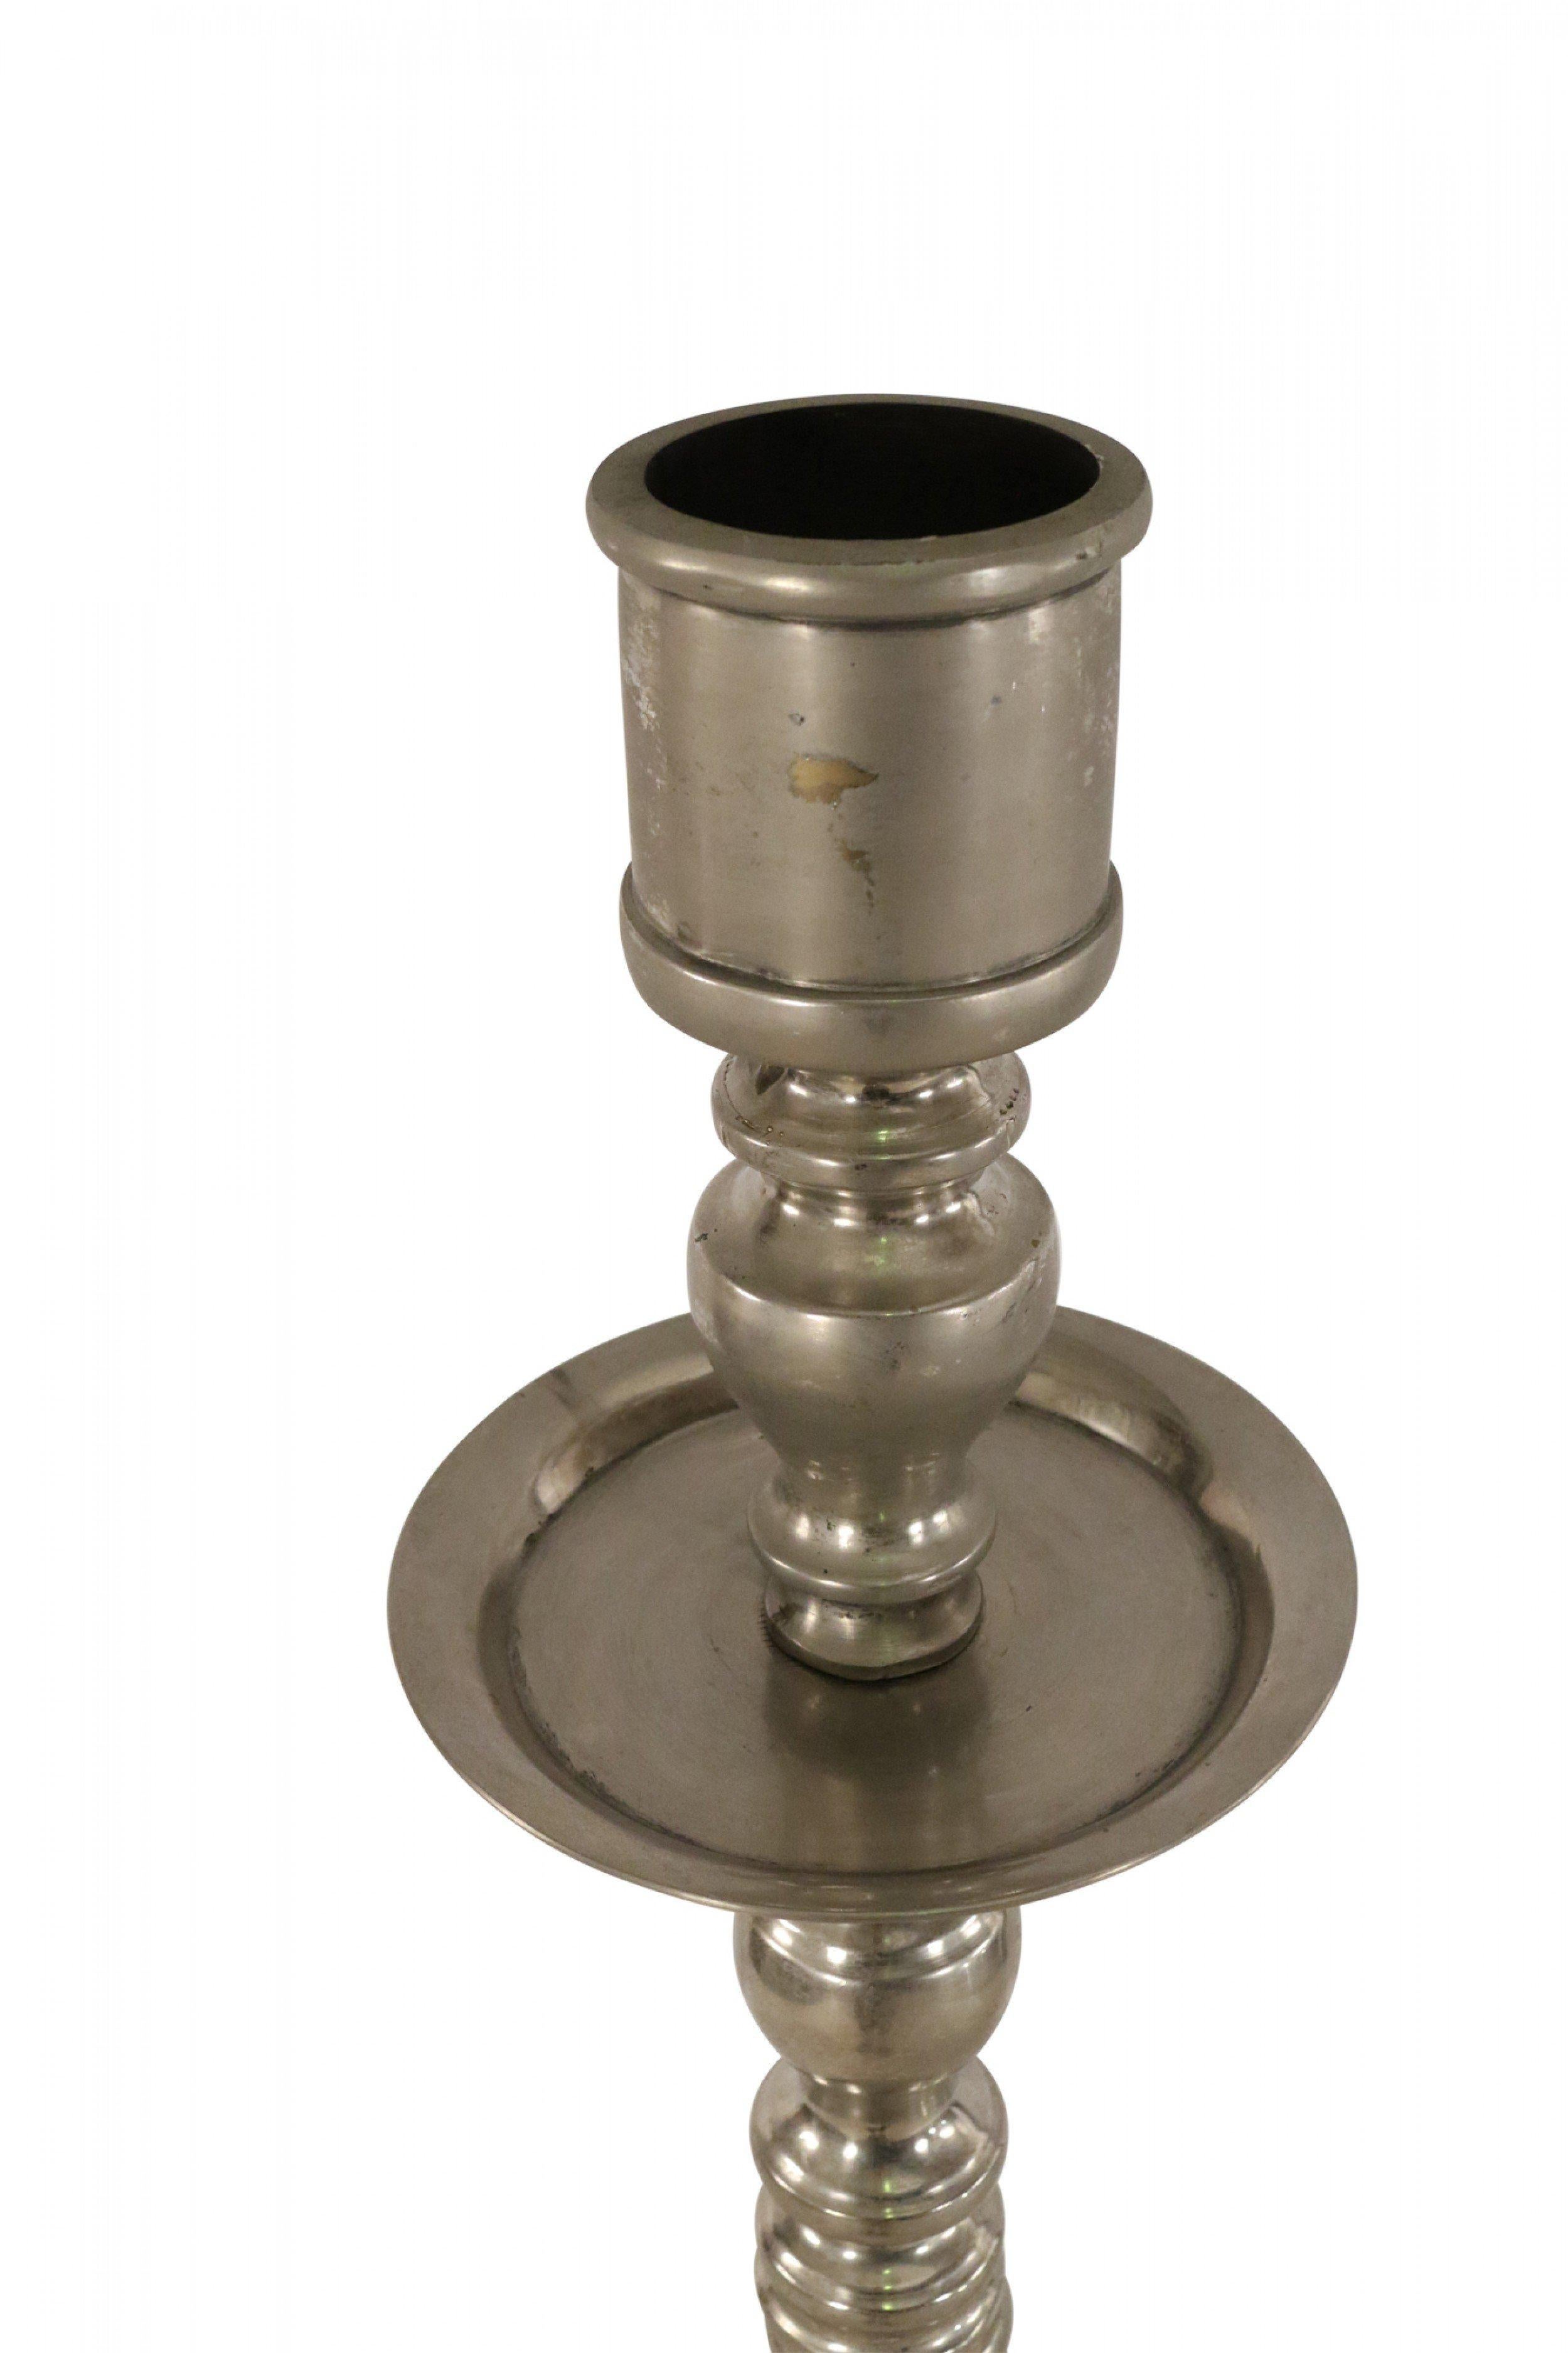 Pair of Mid-Century Silver Metal Turned Design Floor Torchiere/Candle Holders In Good Condition For Sale In New York, NY